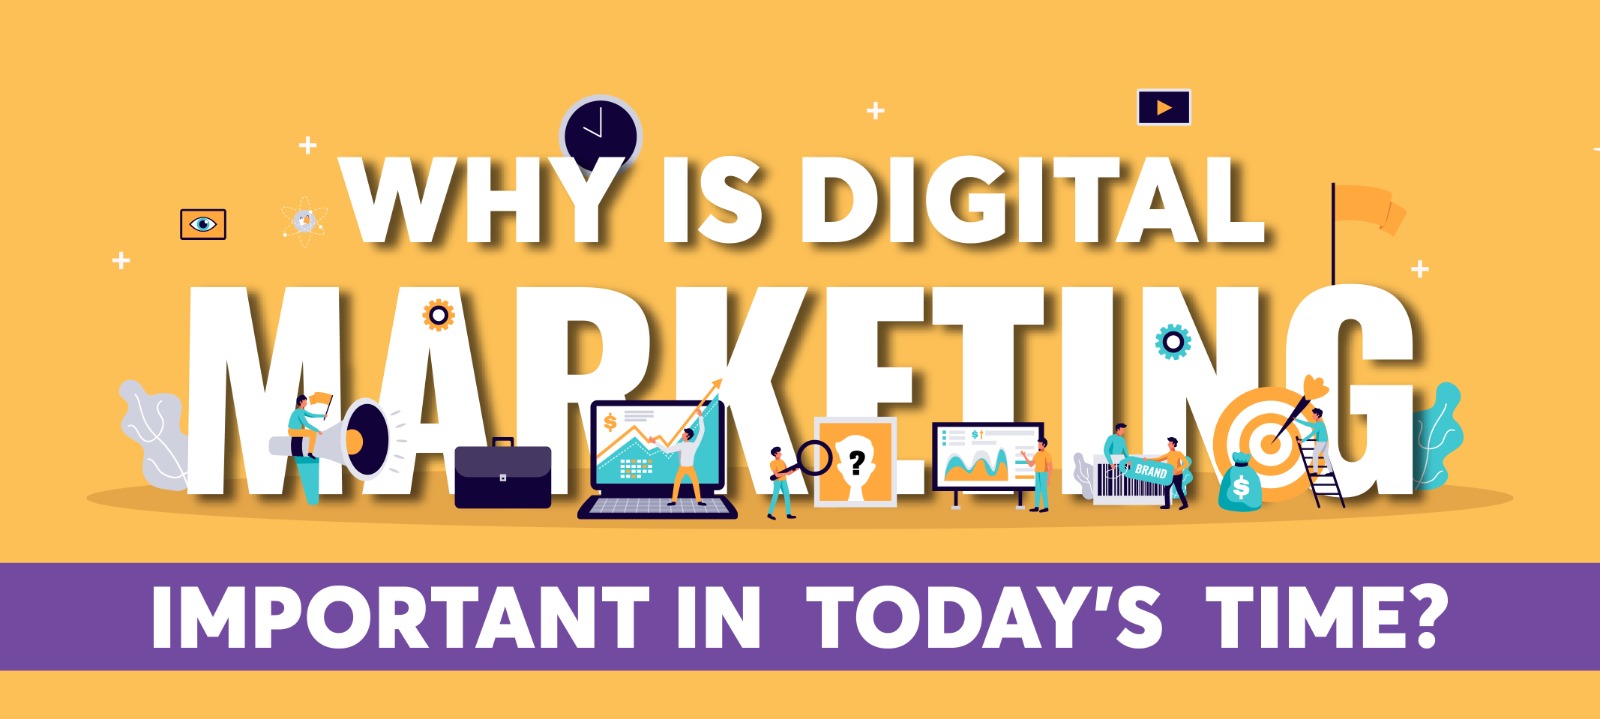 WHY IS DIGITAL MARKETING IMPORTANT IN TODAY’S TIME?